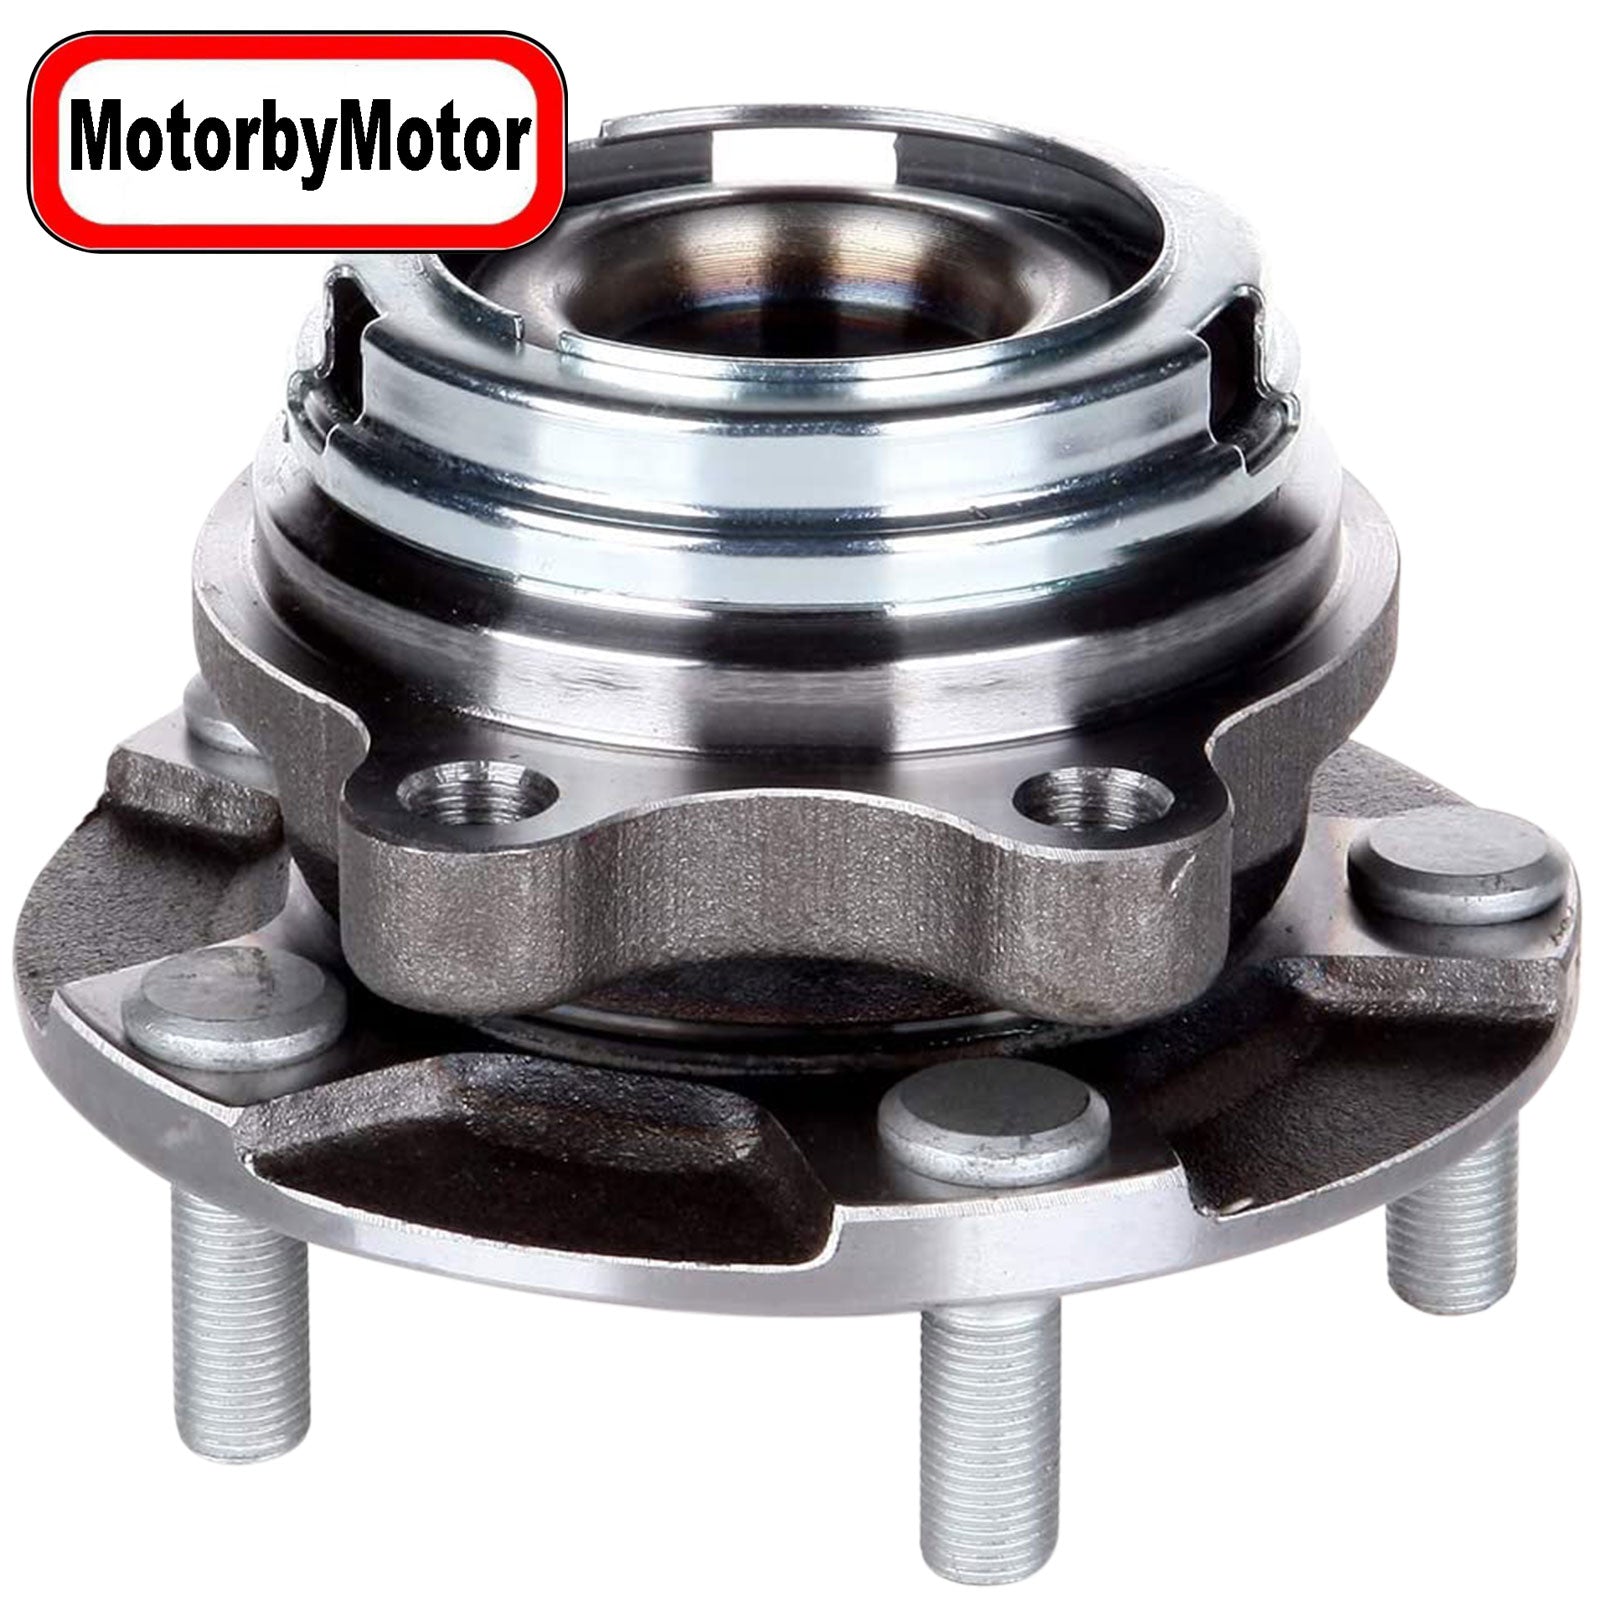 MotorbyMotor 513307 Front Right Side Wheel Bearing Hub Assembly with 5 Lugs Fits for Nissan Murano 2009-2014, Nissan Quest 2011 (w/ABS) Low-Runout Hub Bearing MotorbyMotor